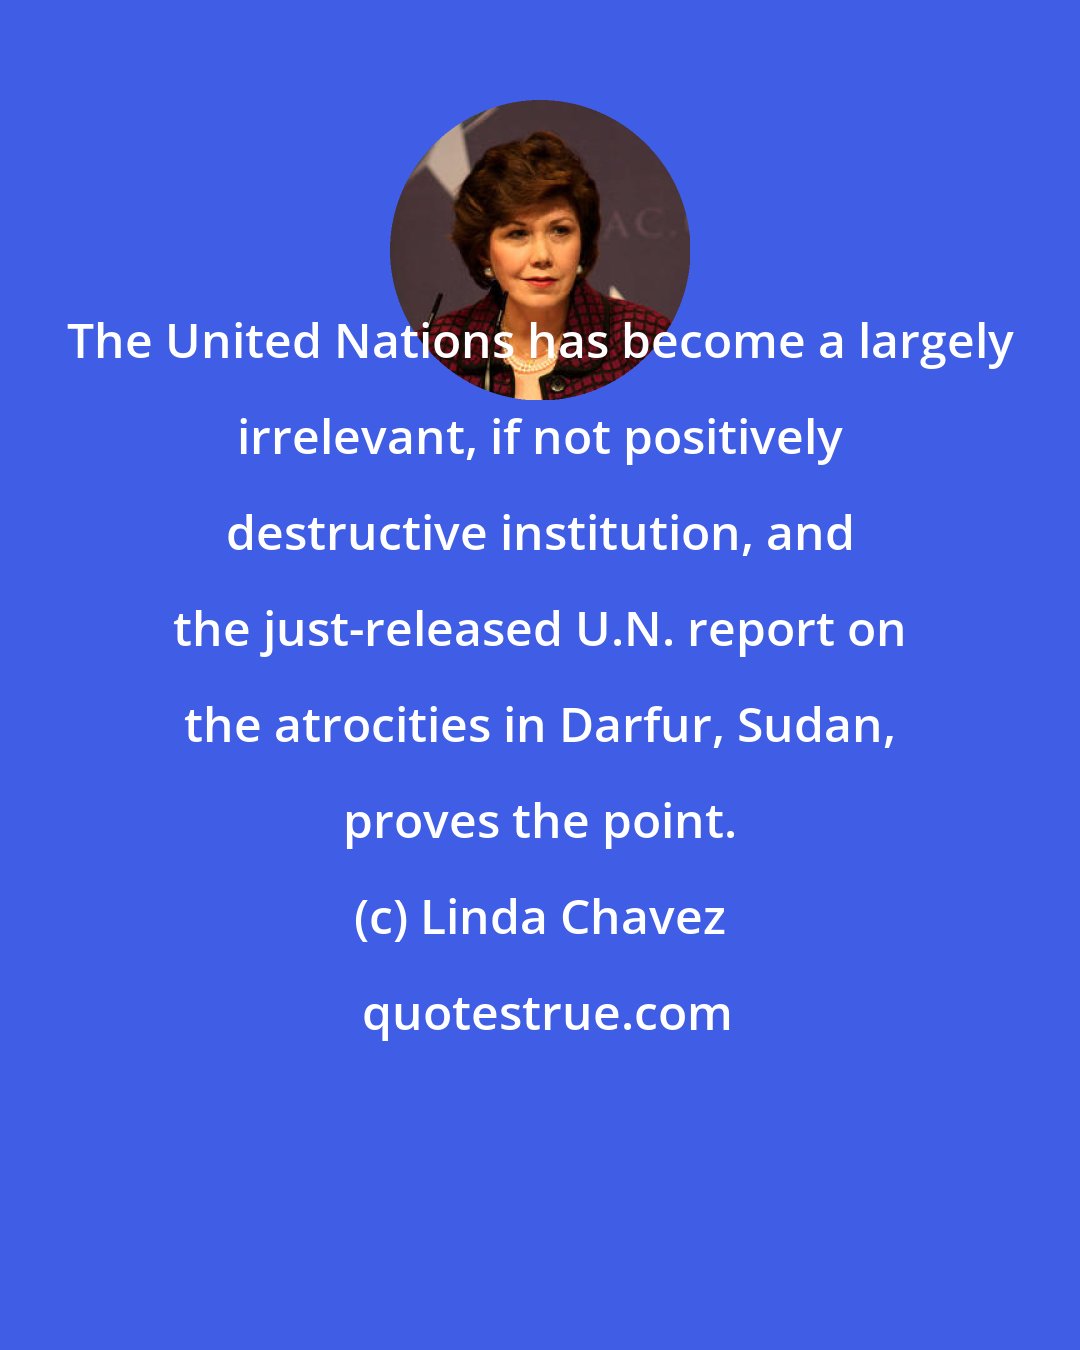 Linda Chavez: The United Nations has become a largely irrelevant, if not positively destructive institution, and the just-released U.N. report on the atrocities in Darfur, Sudan, proves the point.